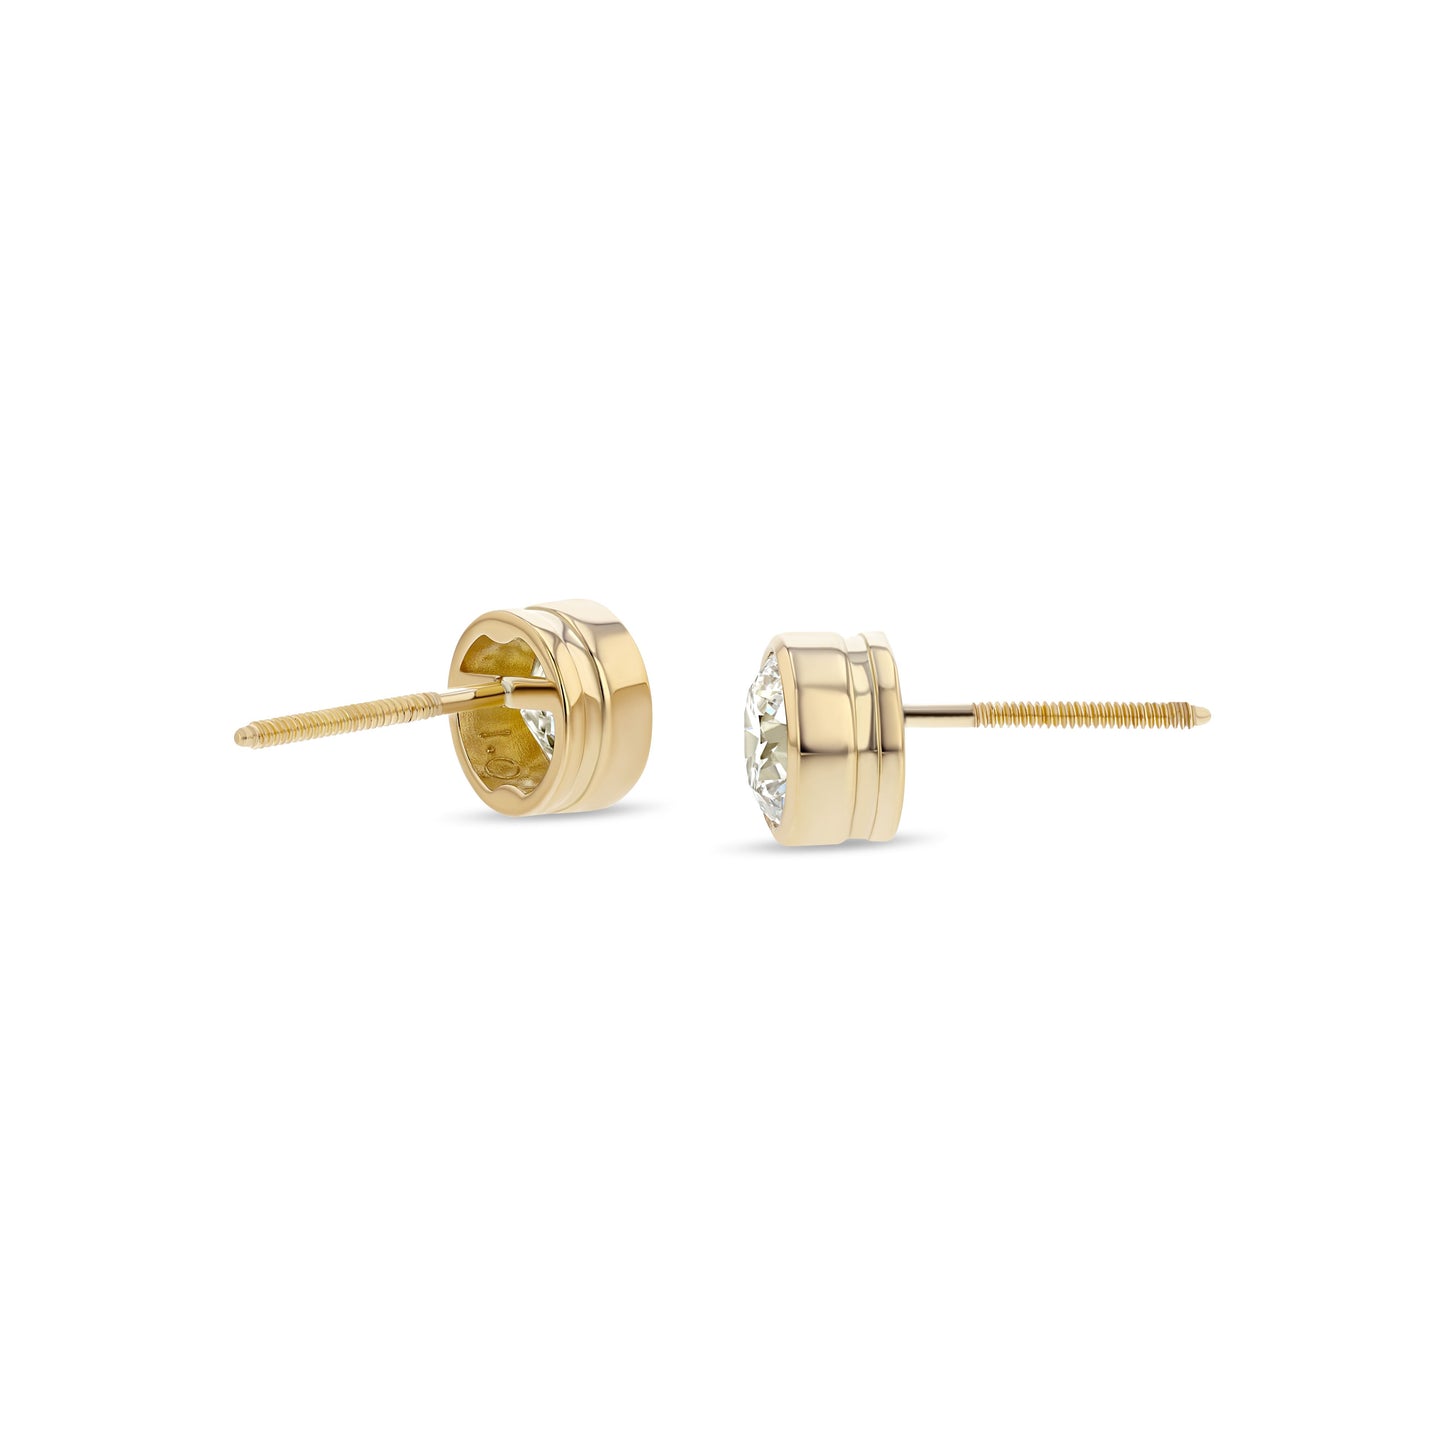 18k Yellow Gold Bezel Set Round Brilliant Diamond Stud Earrings (2.09 Ct. T.w., Si1-si2 Clarity, H-i Color)